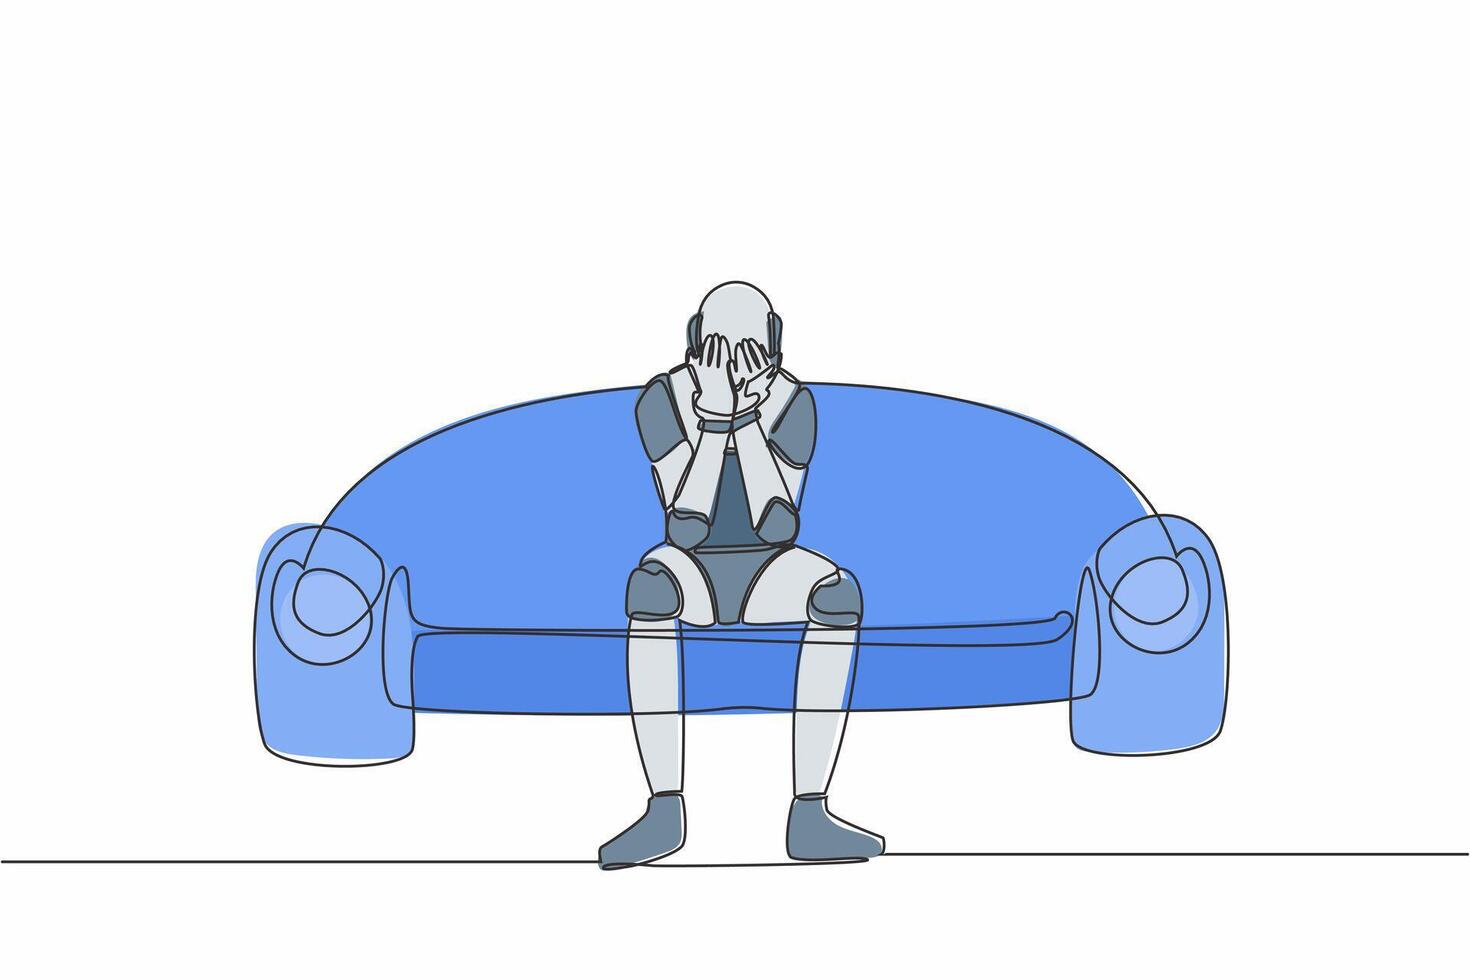 Single one line drawing lonely robot sitting on couch. Holding his head. Failure concept. Robotic artificial intelligence. Technology industry. Continuous line draw design graphic vector illustration